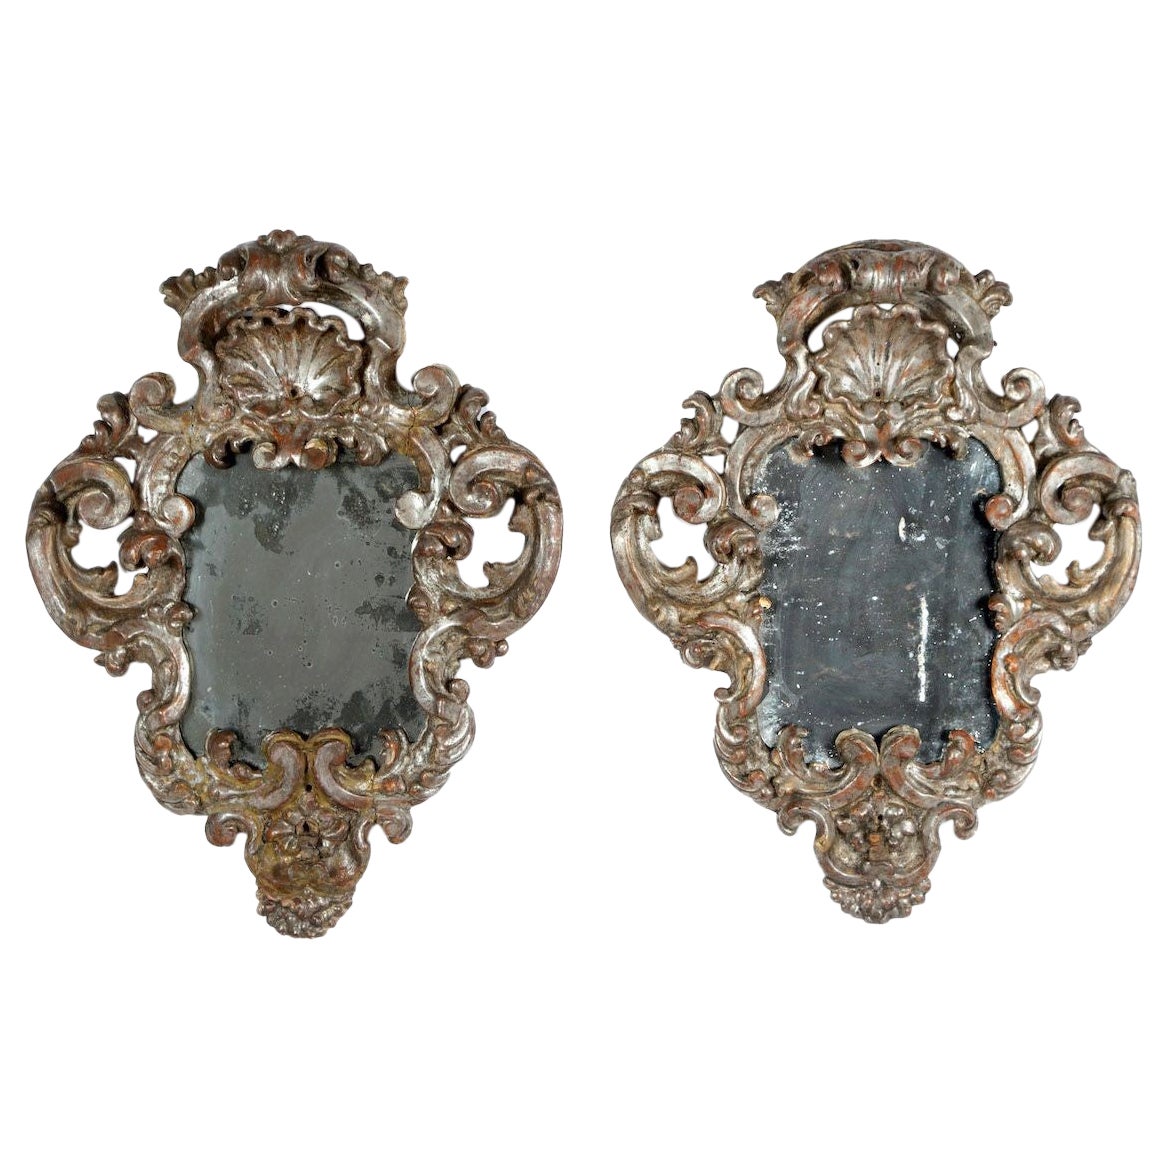 18th c. Pair Italian Baroque Mirrors with Original Silver Leaf and Mirror Plates